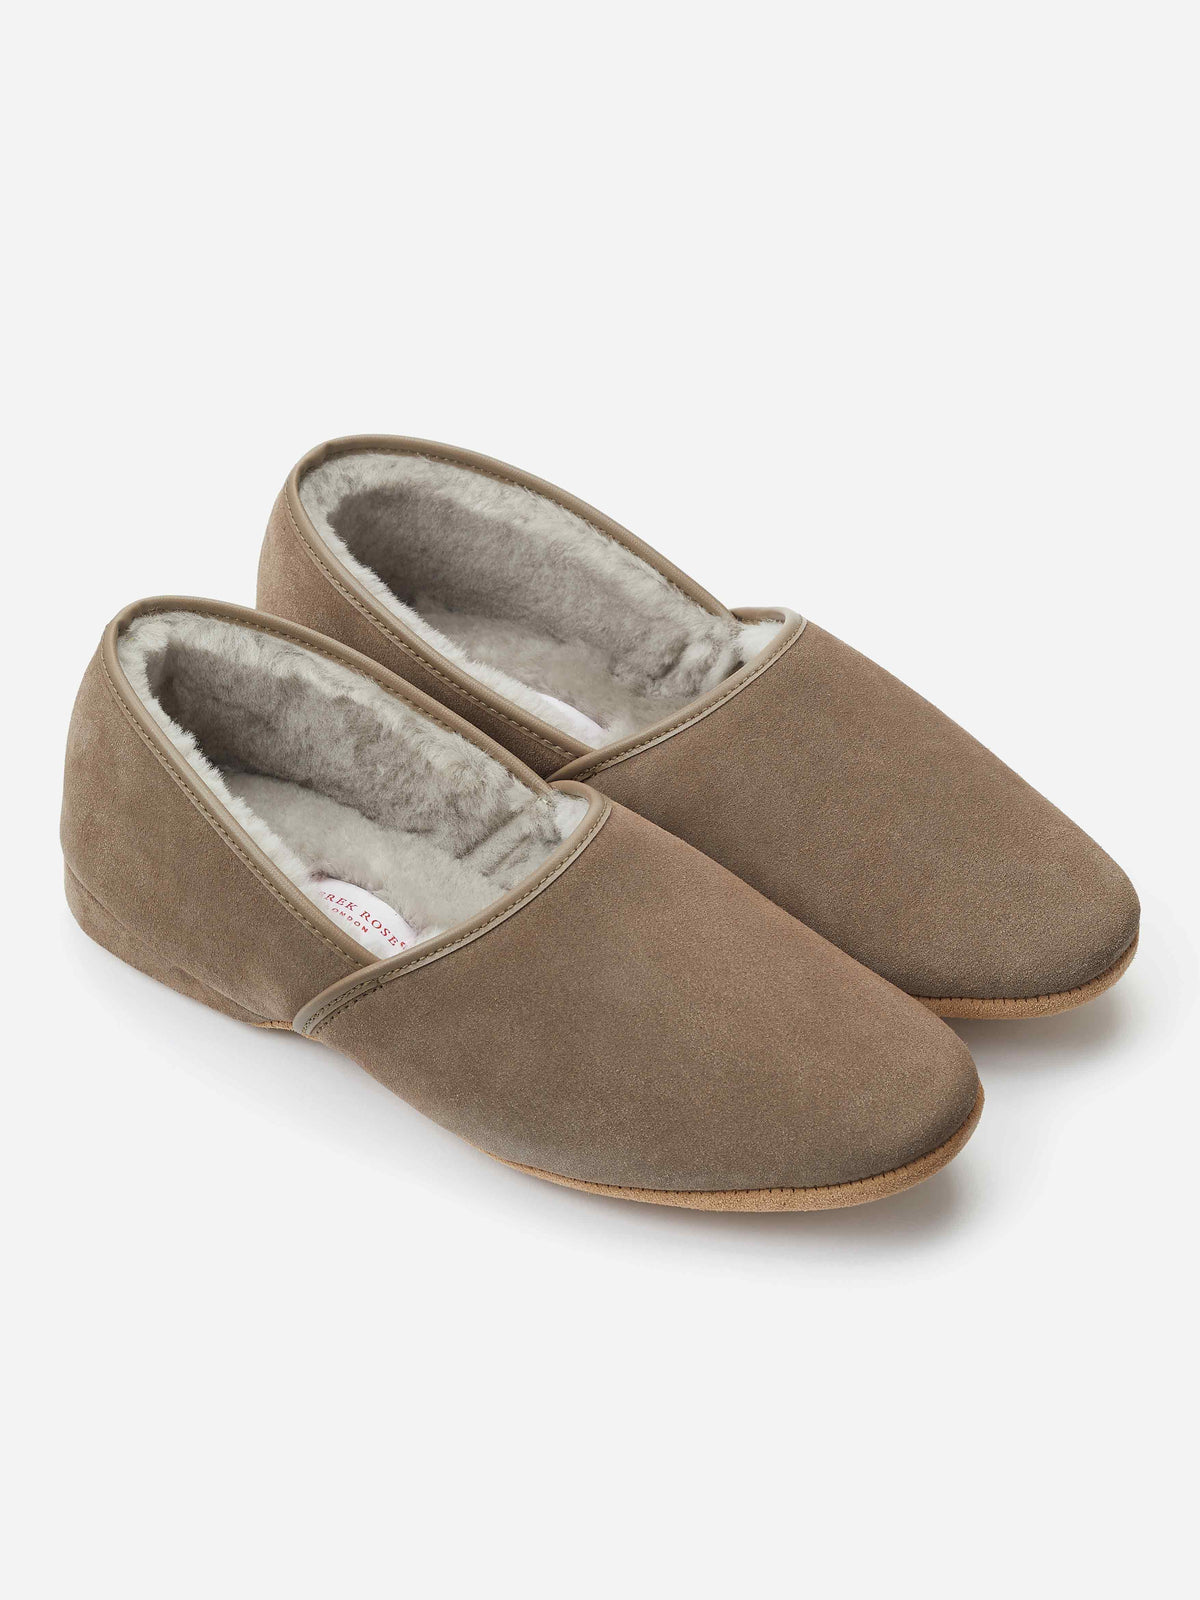 Outbound Men's Fleece Lined Leather Indoor House Slippers Non-Slip, Grey |  Canadian Tire